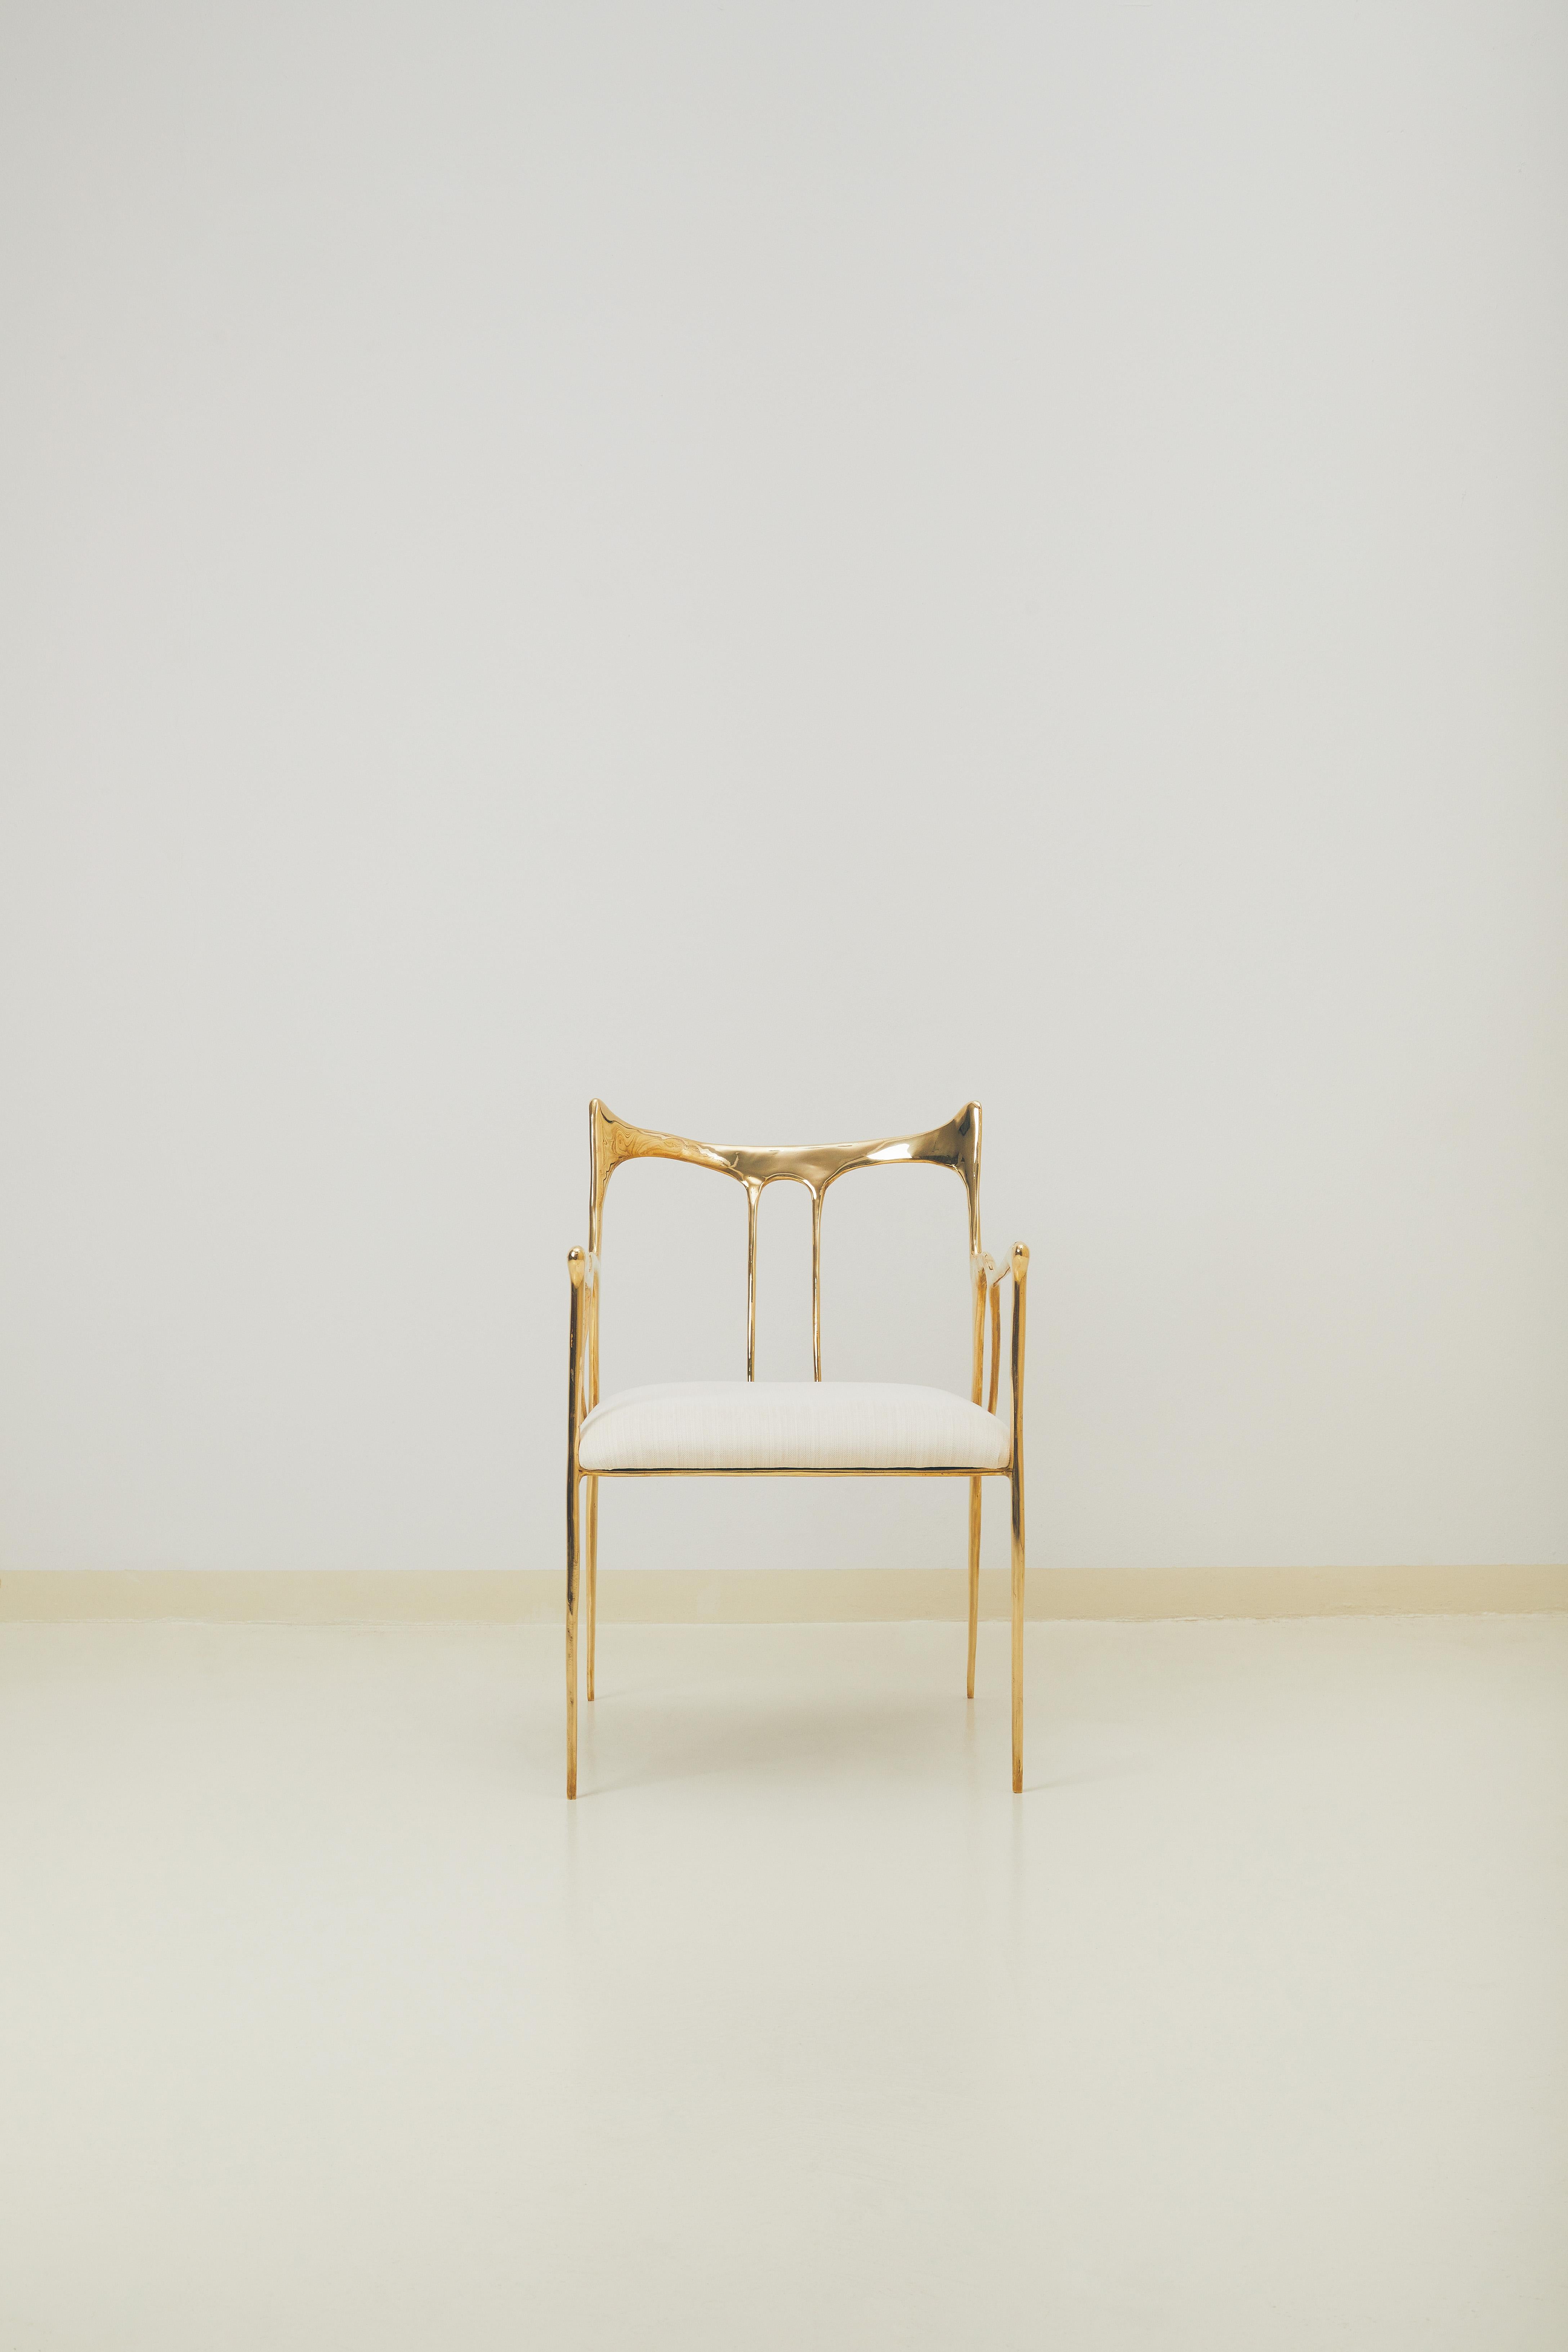 Post-Modern Calligraphic Sculpted Brass Chair by Misaya For Sale